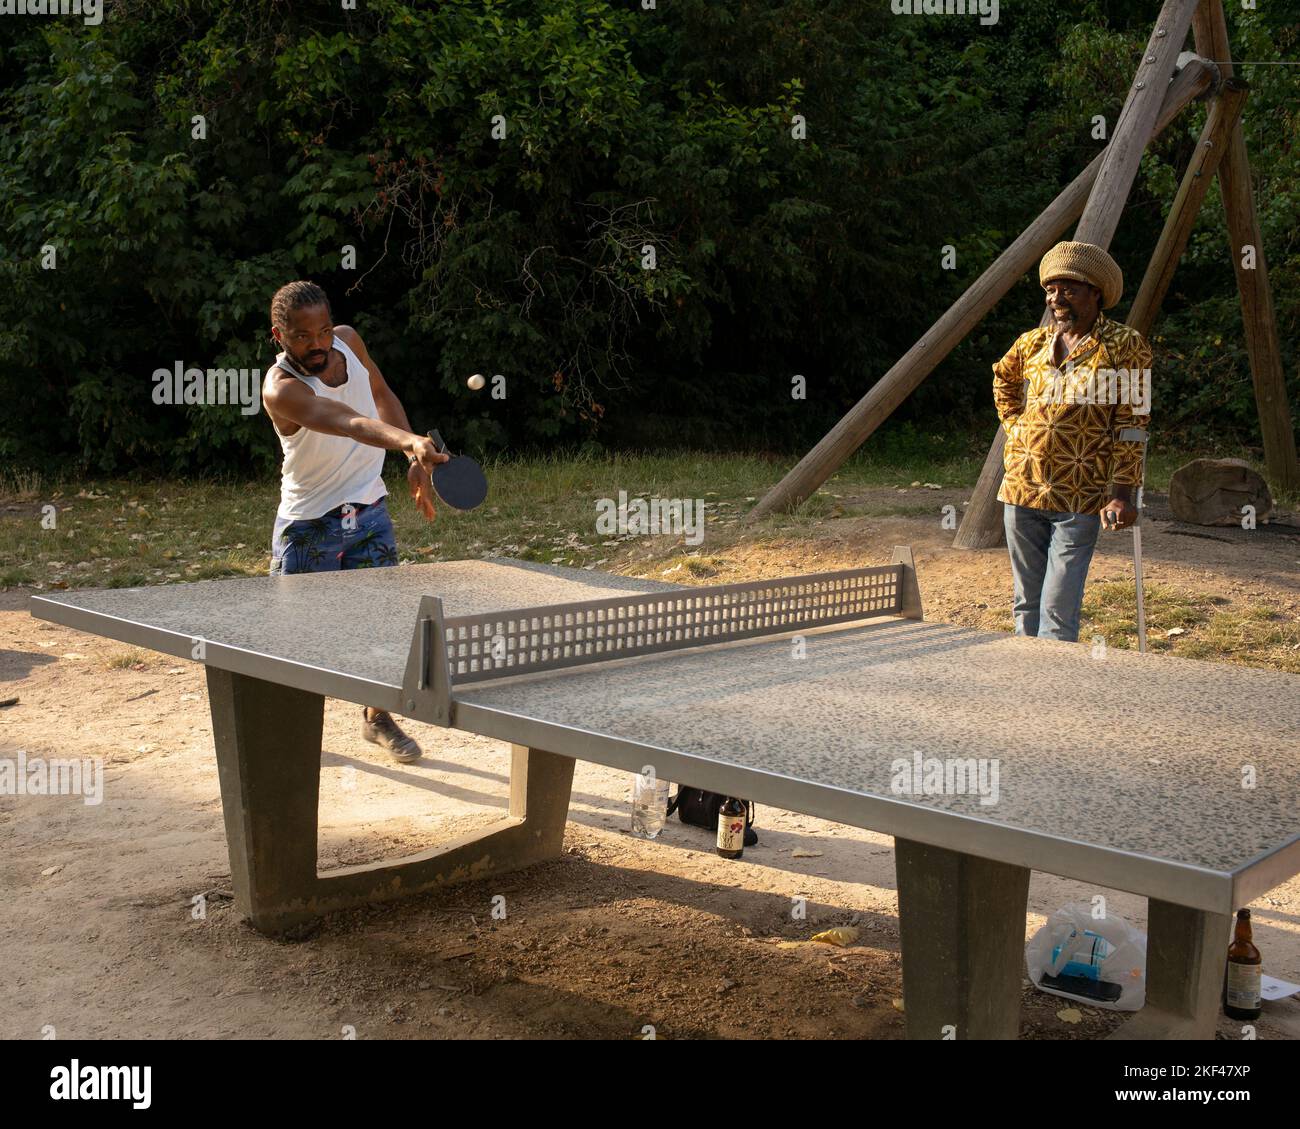 playing table tennis in Mayow Park, lewisham Stock Photo